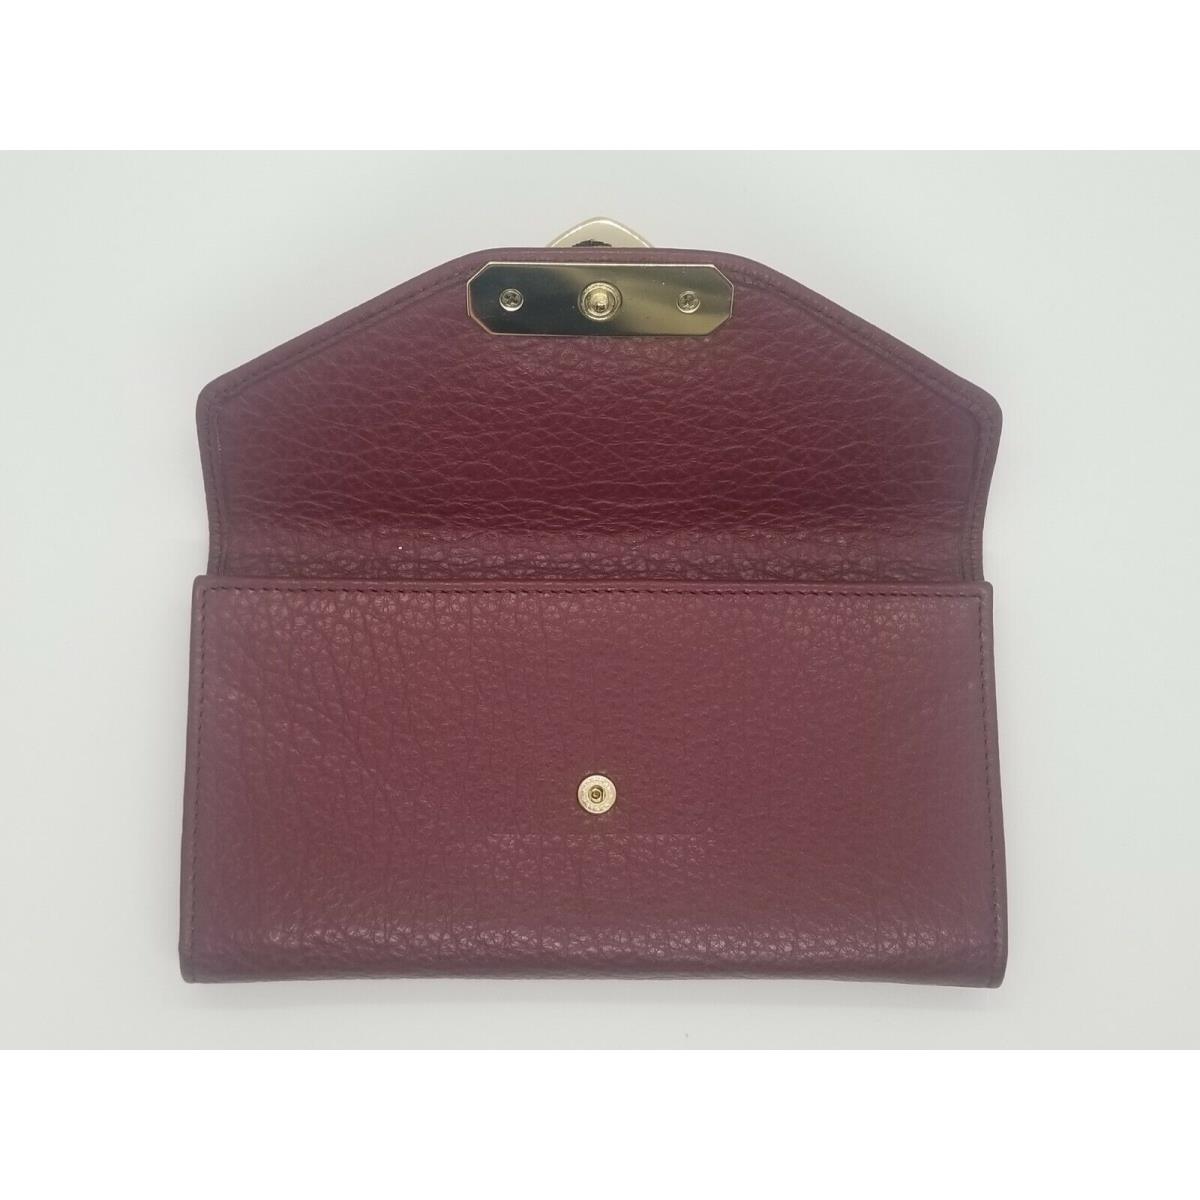 Versace Collection LPDS301 Women s Burgundy Leather Wallet